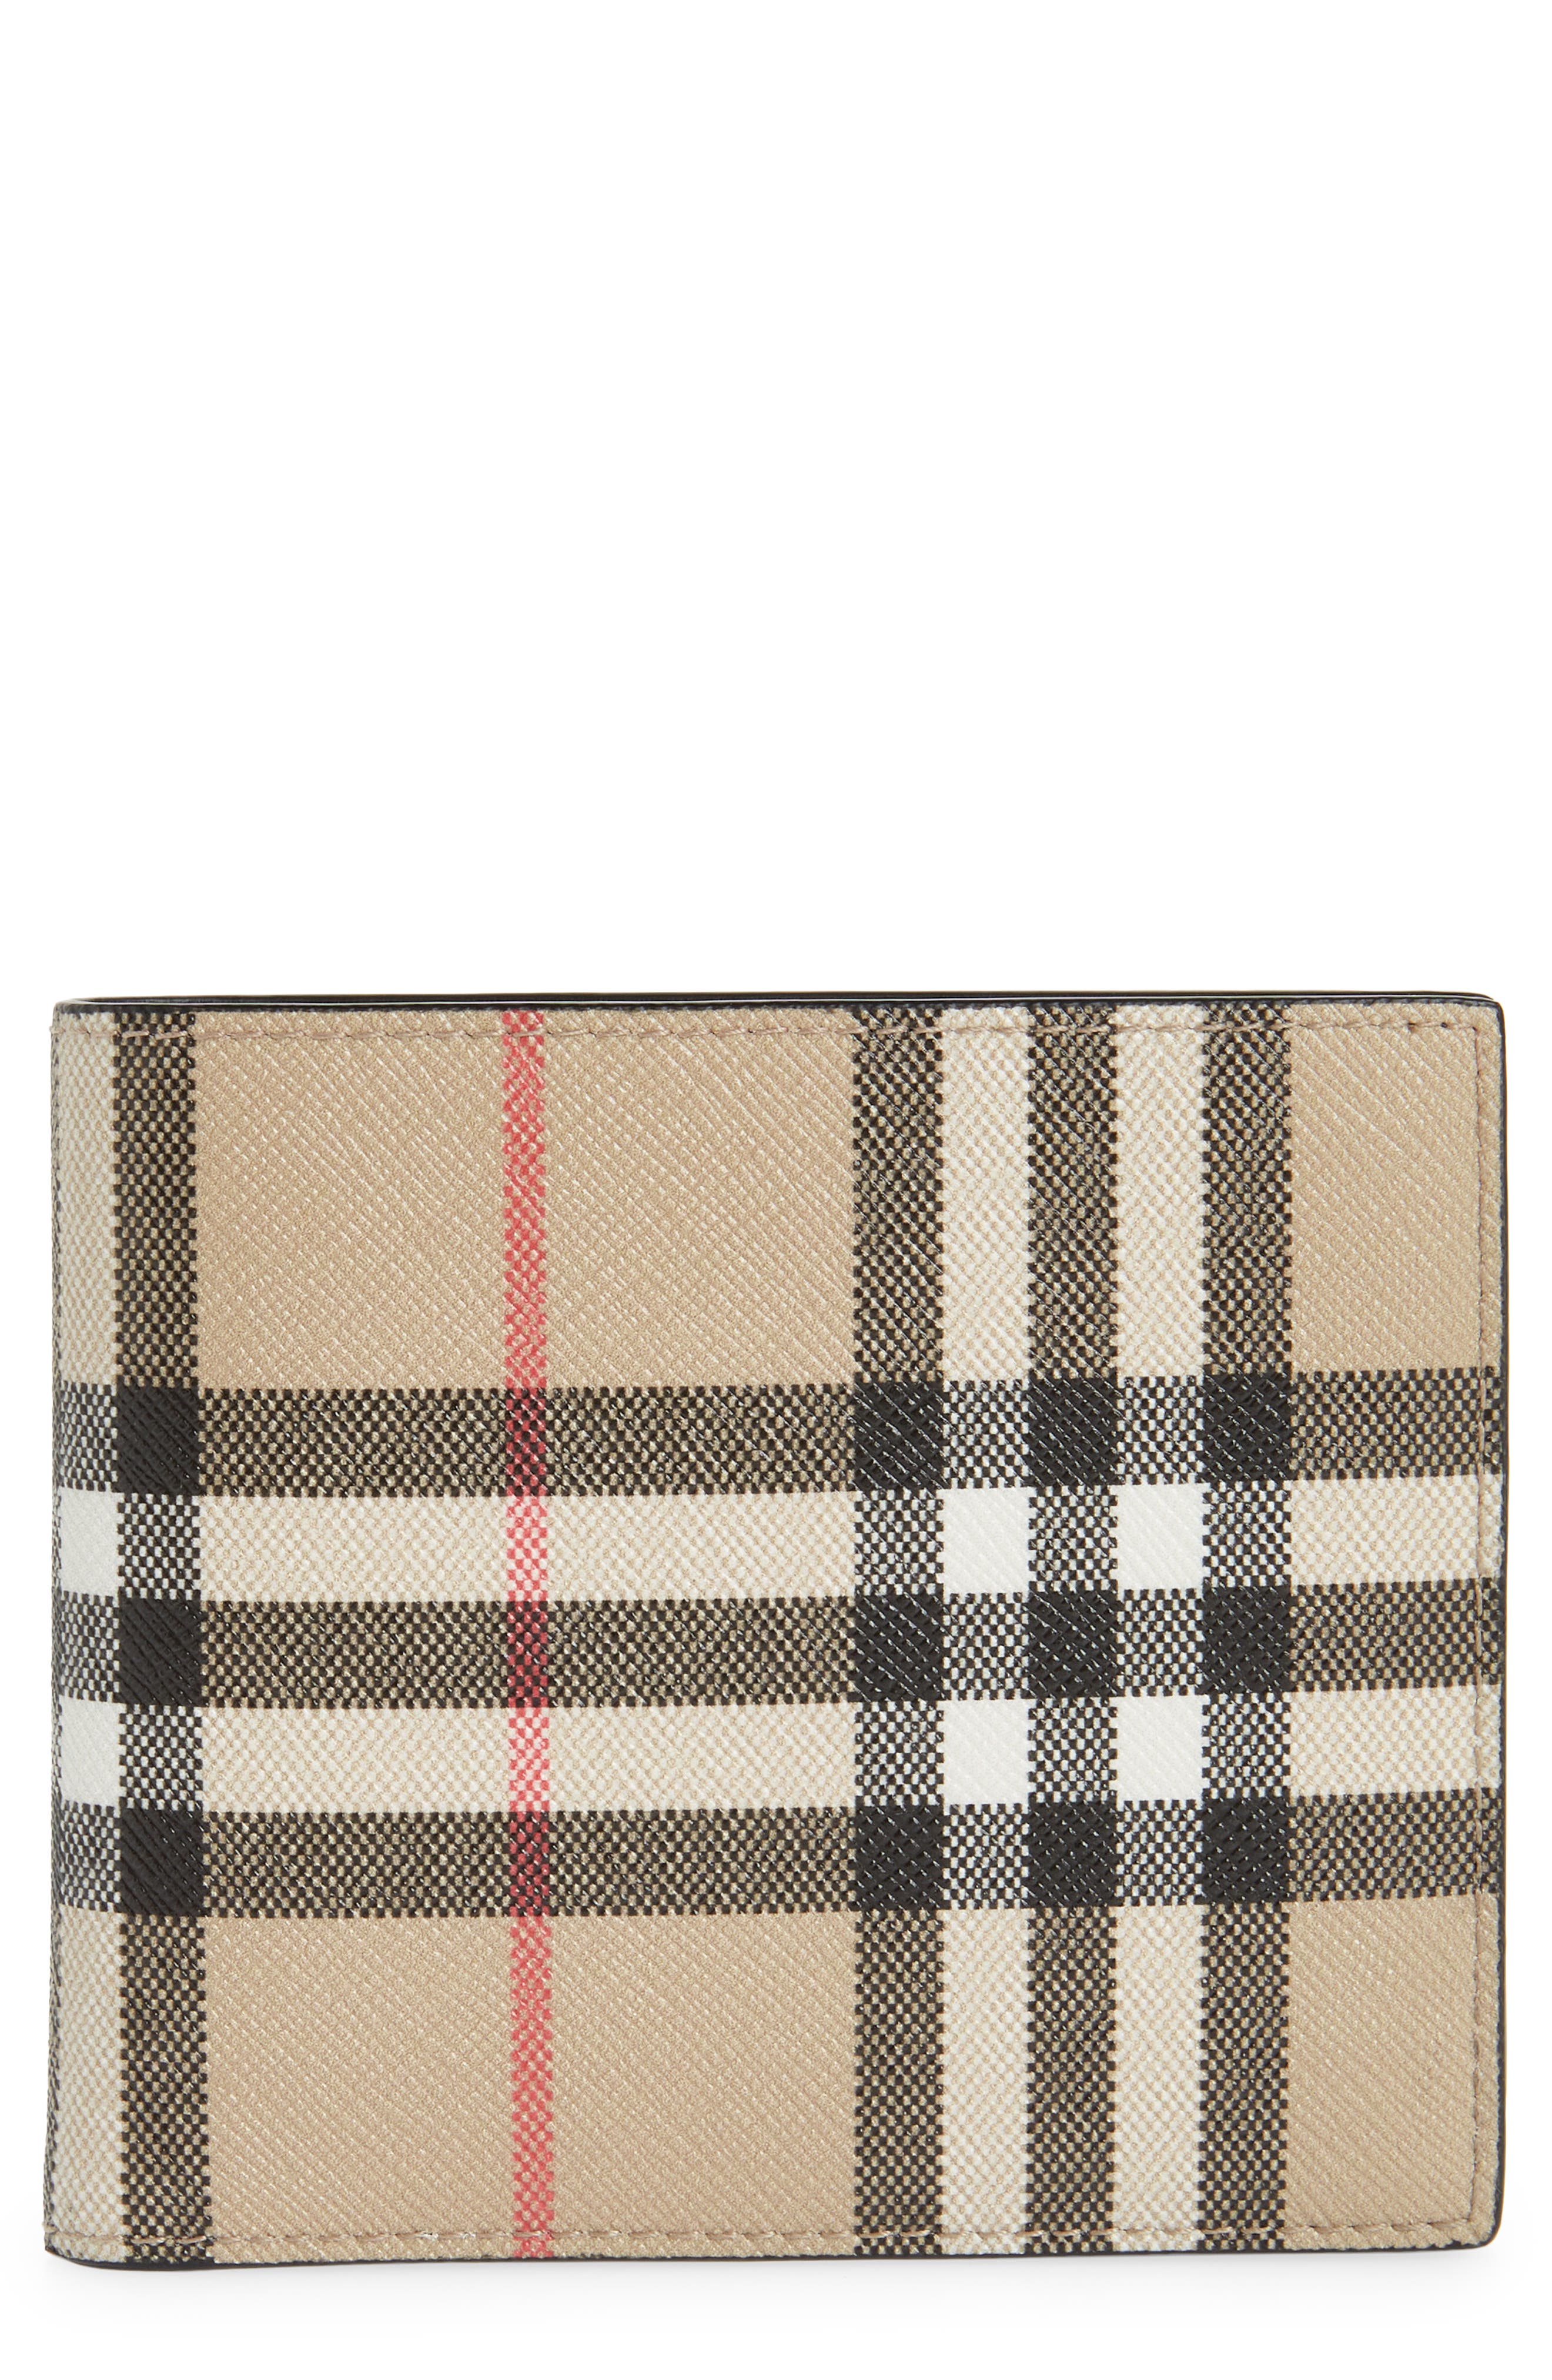 Burberry Vintage Check E-Canvas Bifold Wallet in Archive Beige at Nordstrom